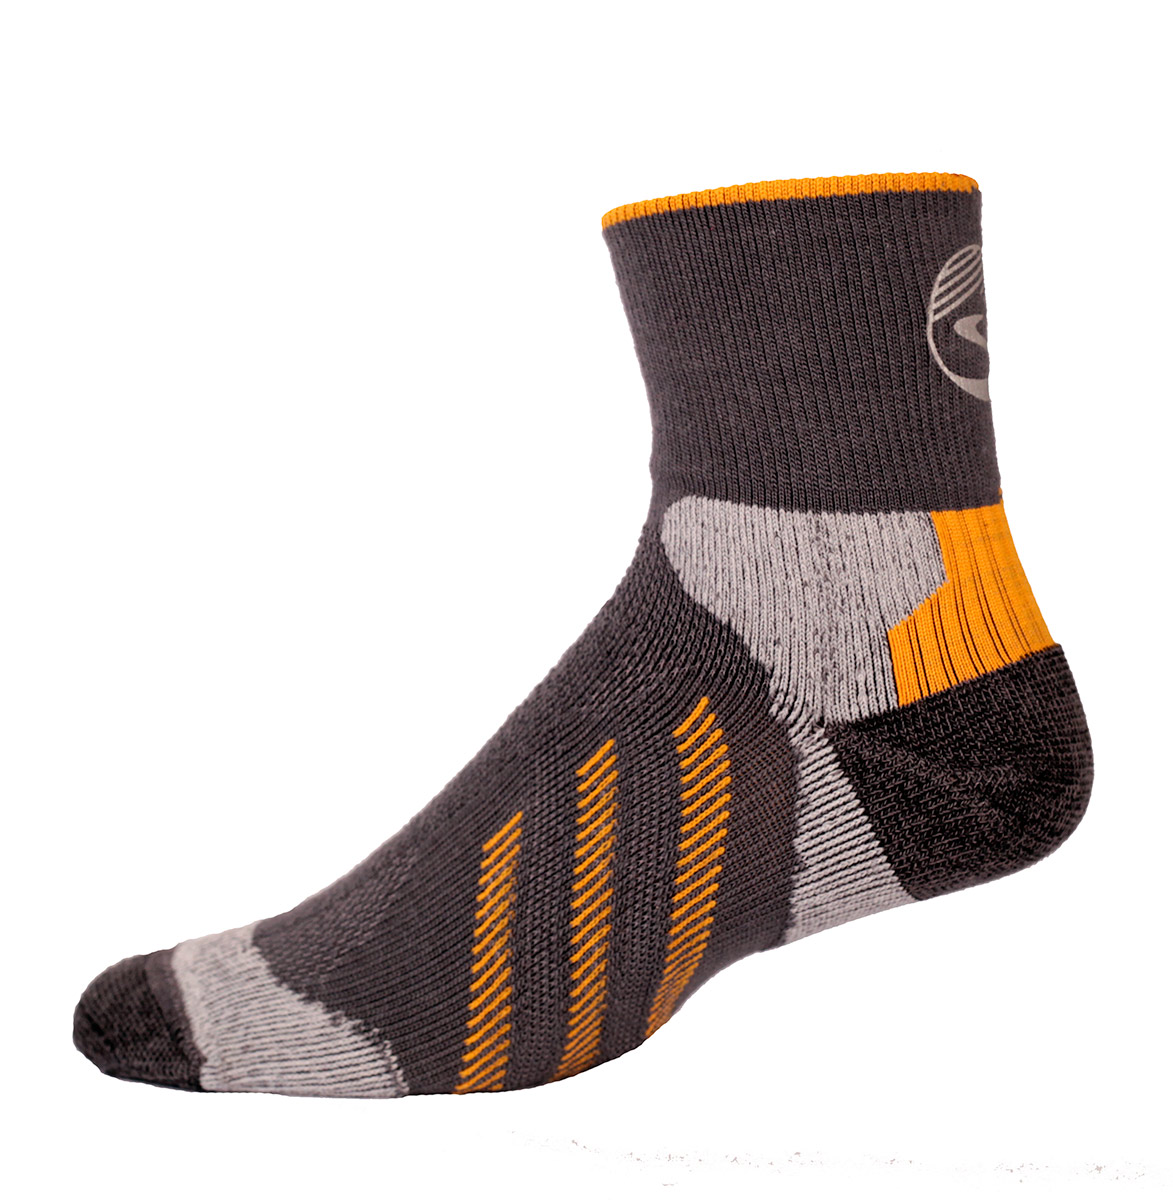 Showers Pass' new Torch socks have durable reflective feature | Bicycle ...